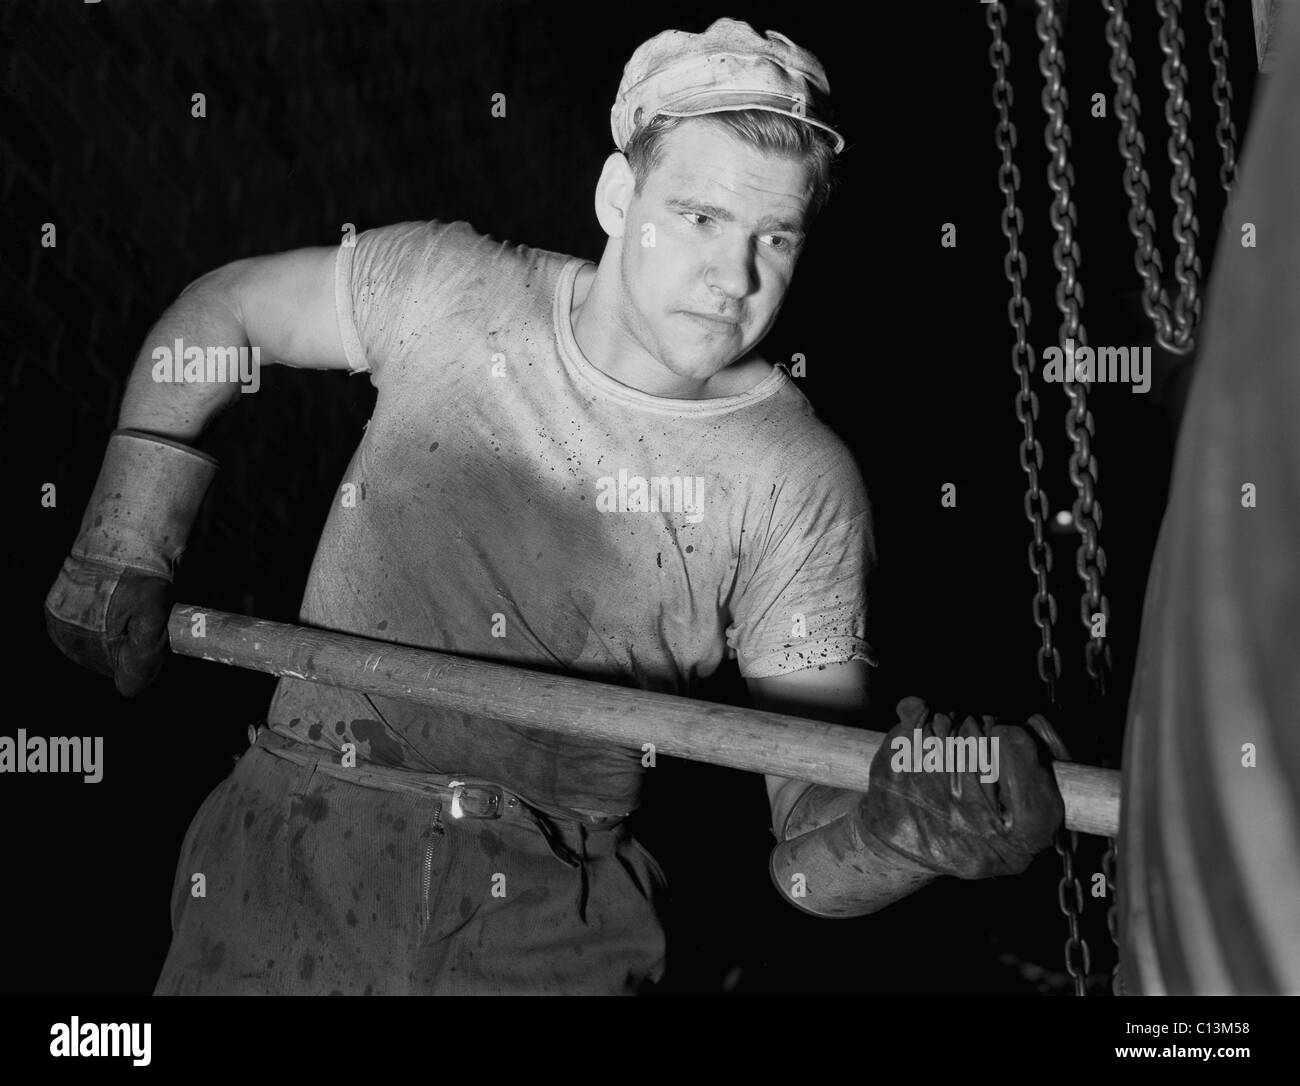 World war 2 Black and White Stock Photos & Images - Alamy